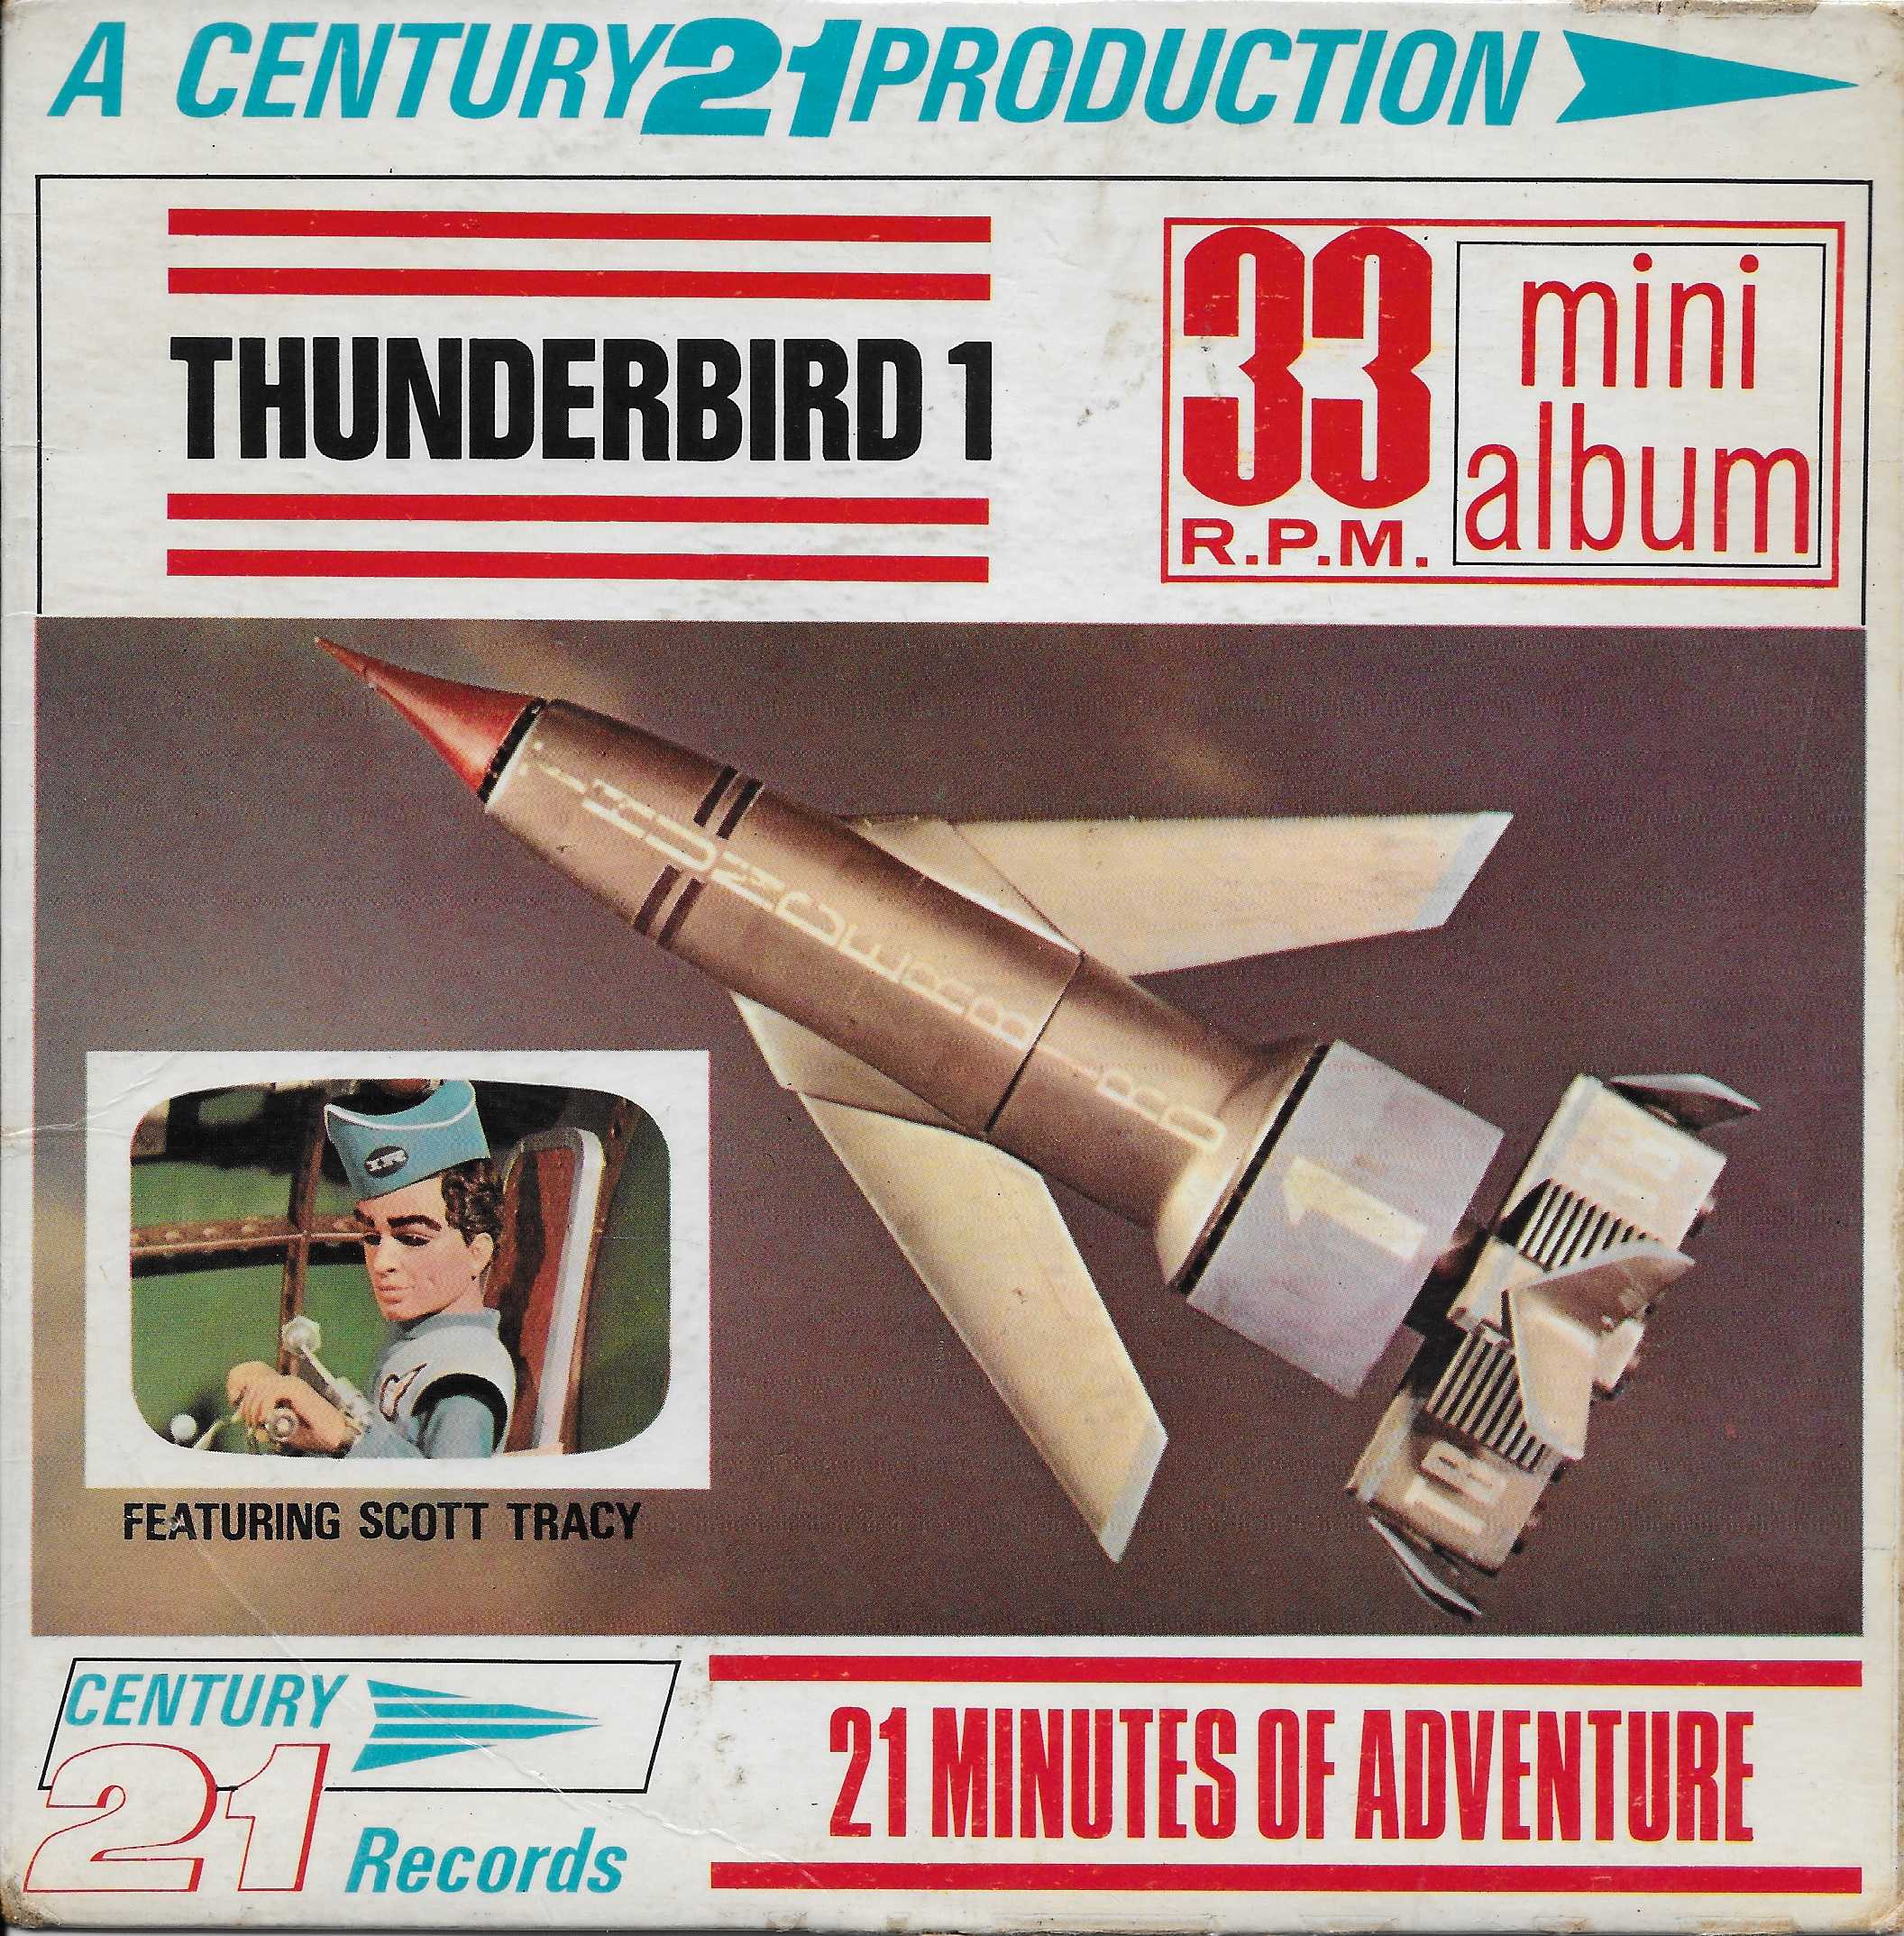 Picture of MA 108 Thunderbird 1 by artist Barry Gray from ITV, Channel 4 and Channel 5 library